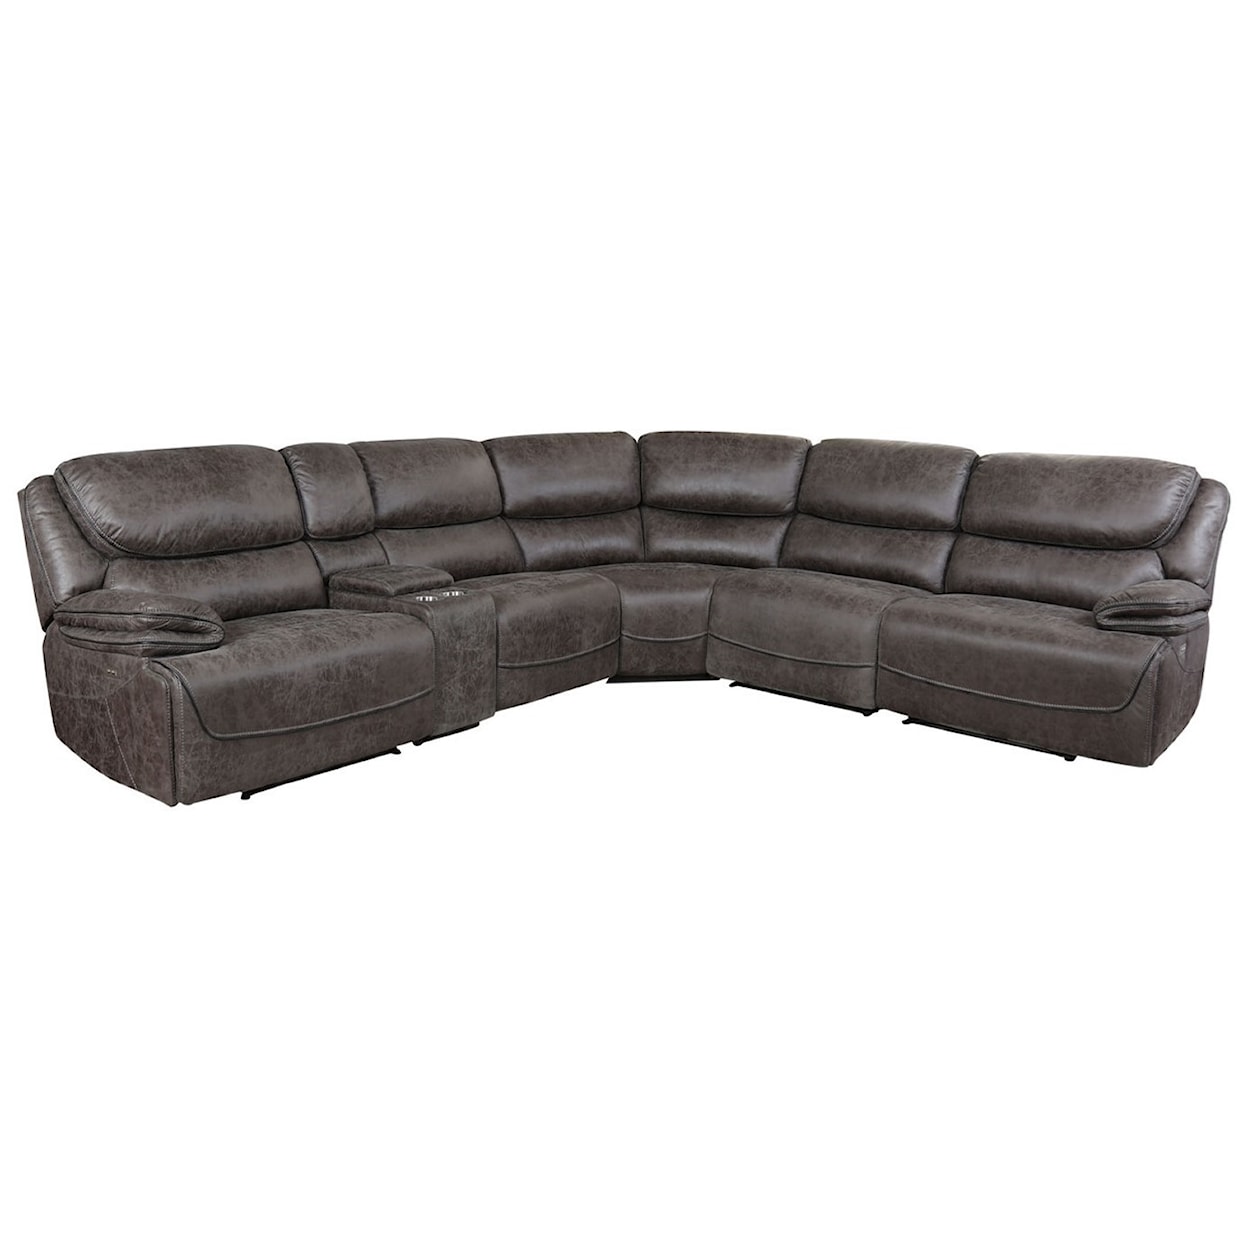 Steve Silver Plaza Reclining Sectional Sofa